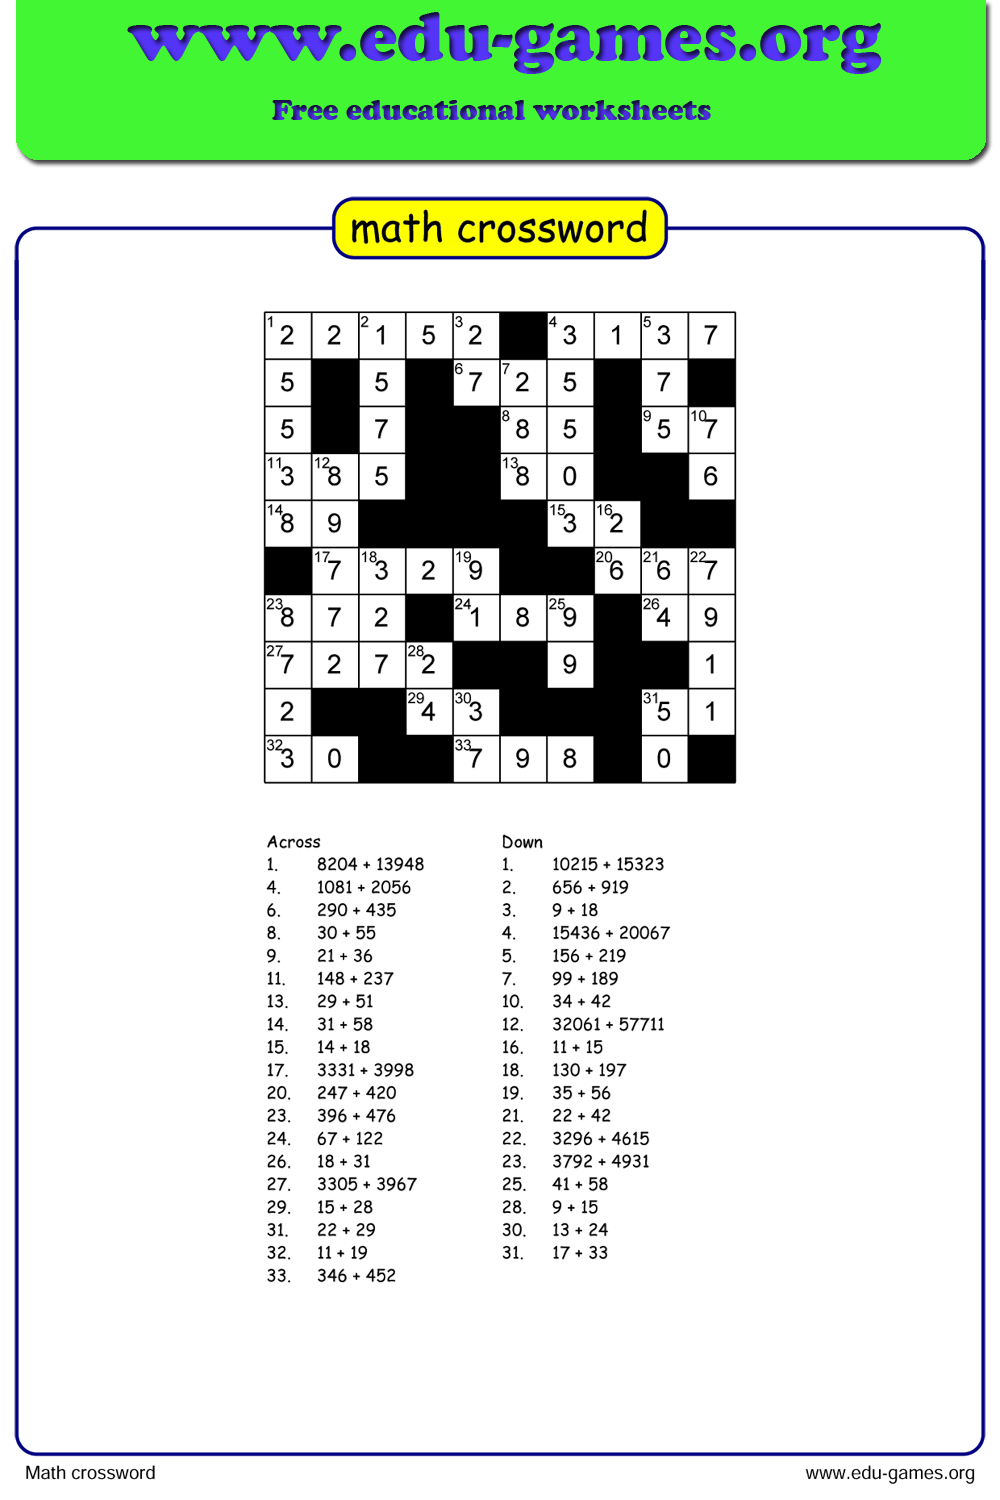 In Addition Crossword Clue 7 Letters How To Do This - Easy Crossword Clue 7 Letters